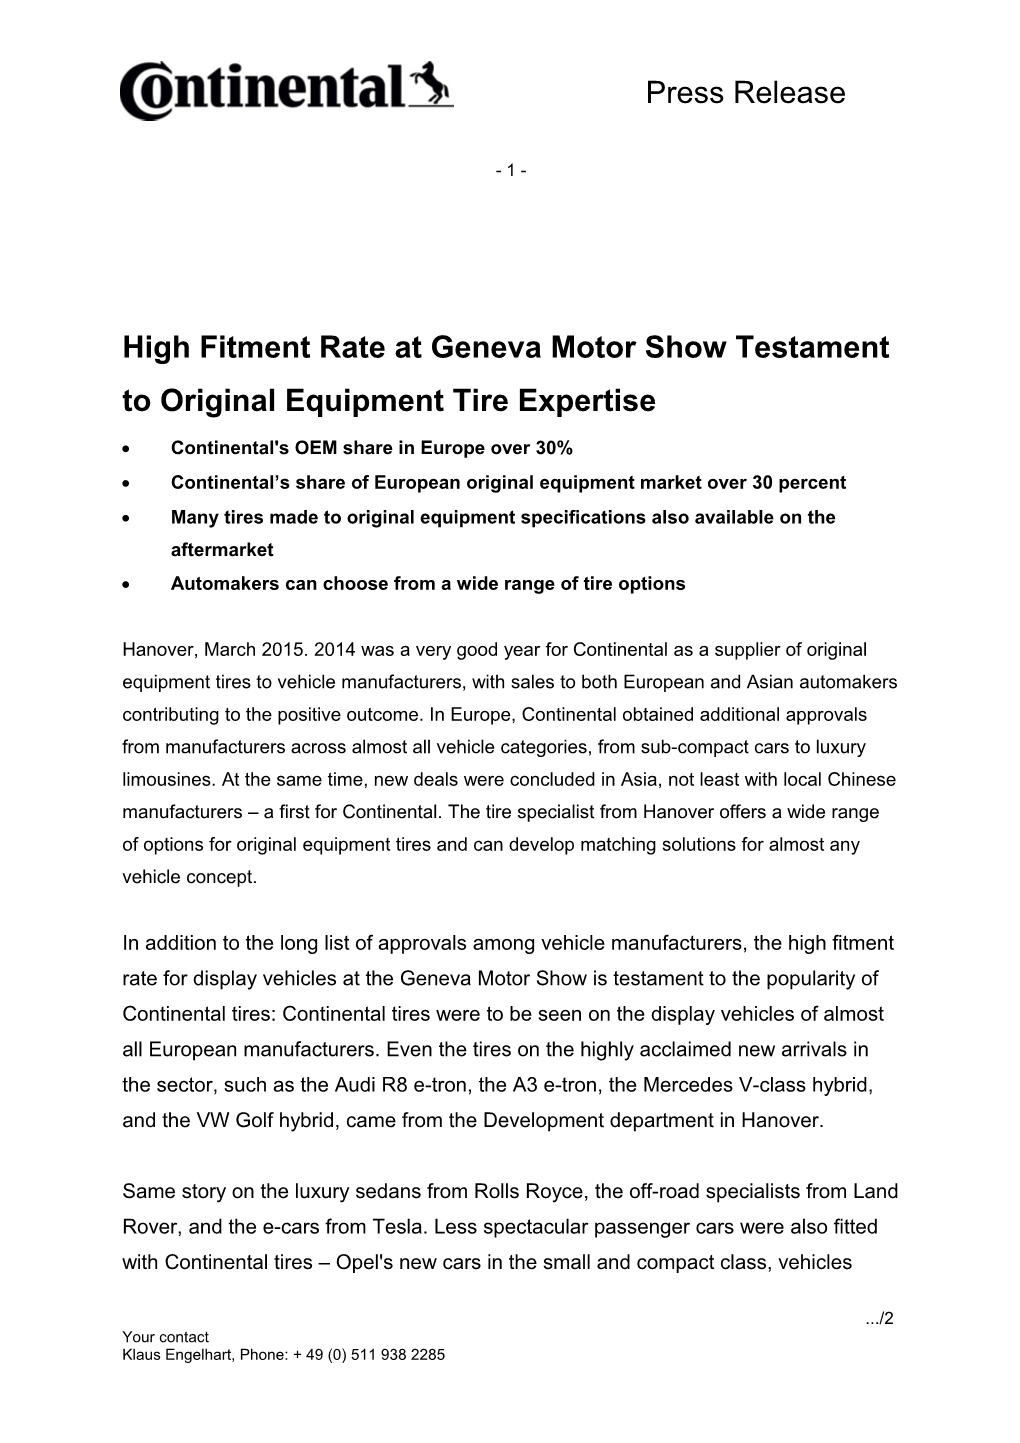 High Fitment Rate at Geneva Motor Show Testament to Original Equipment Tire Expertise